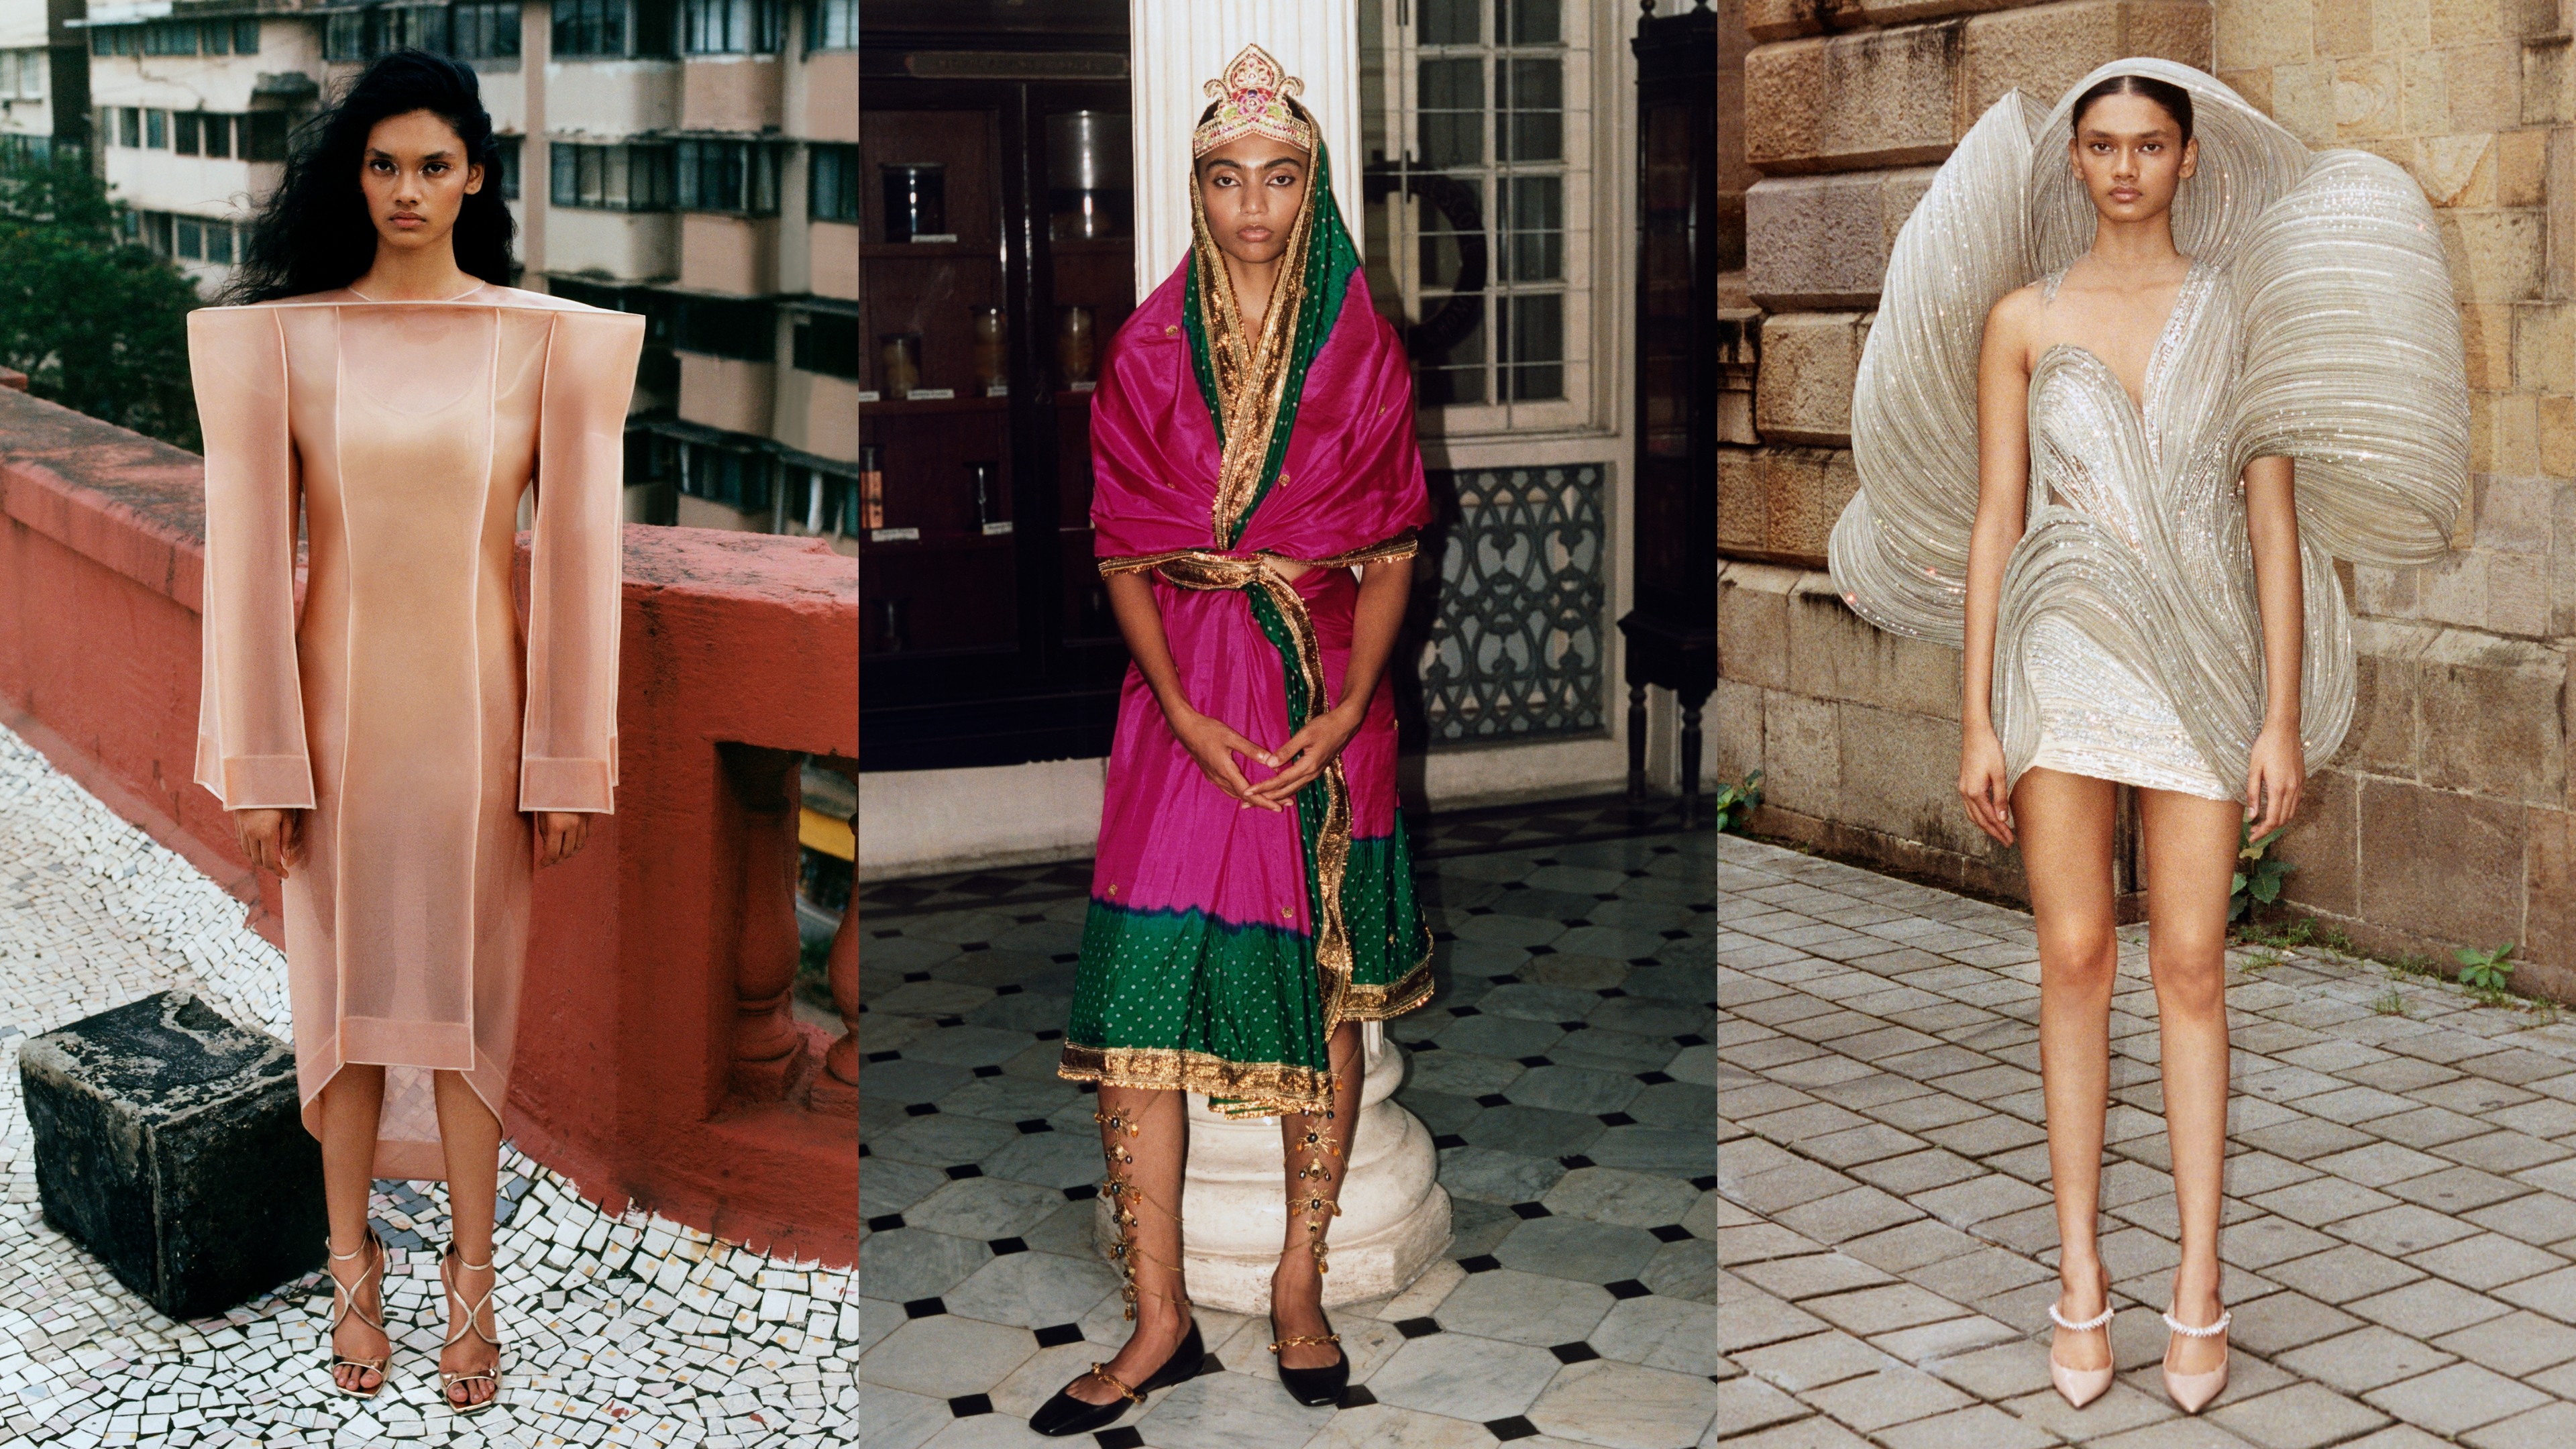 The Indian artisans behind Paris Couture. Recognition at last?